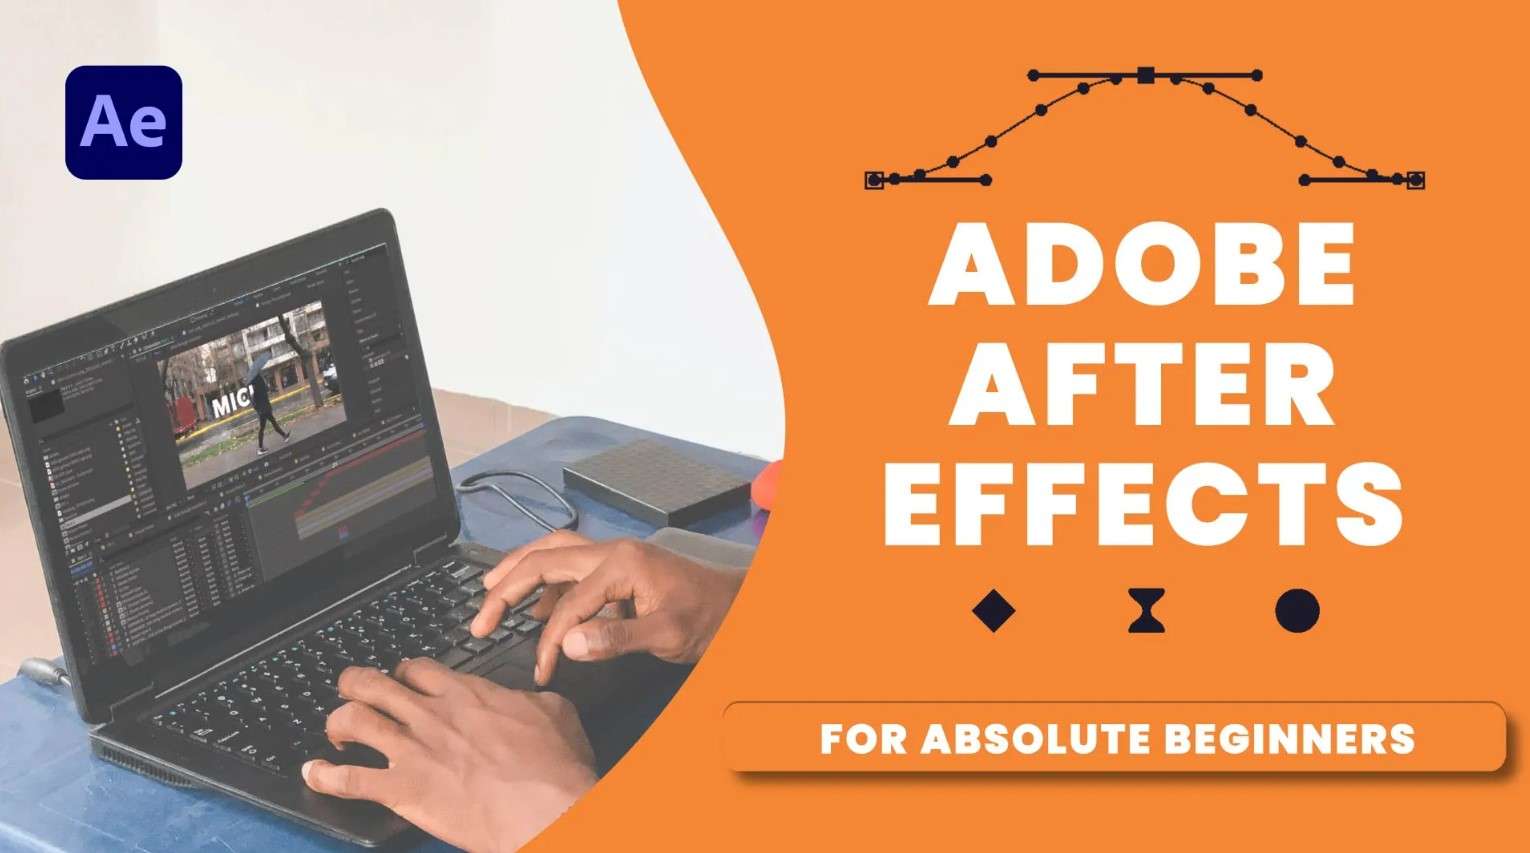 Adobe After Effects complete course from beginner to Advanced.